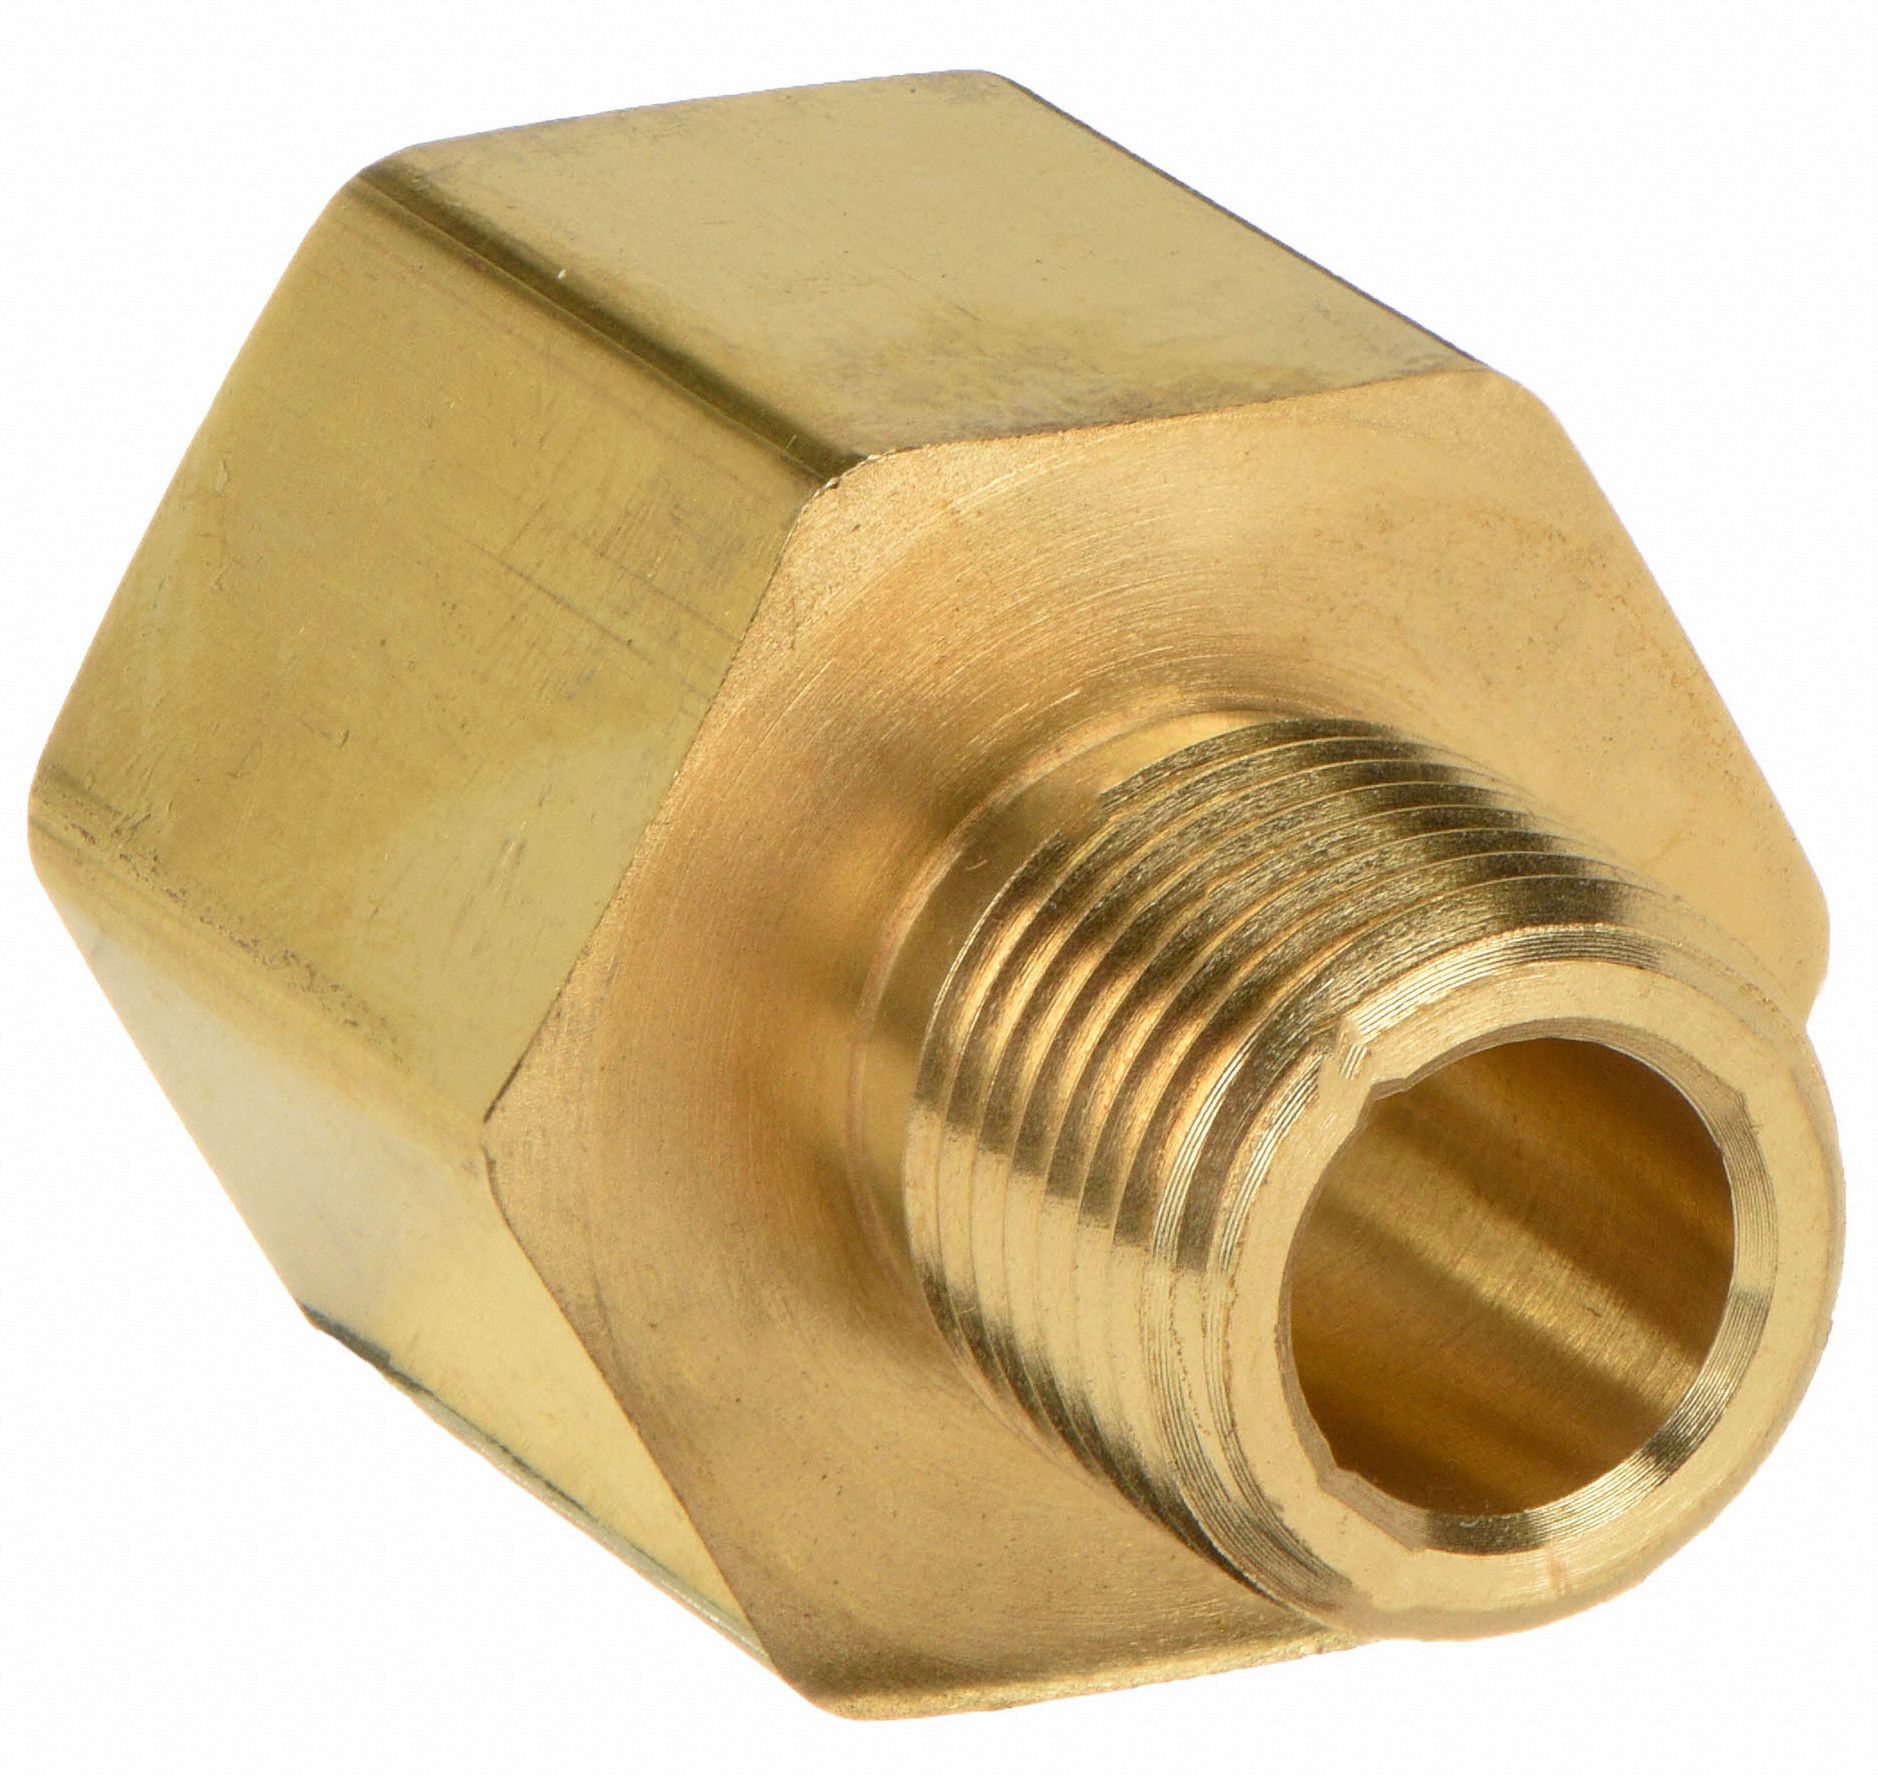 Brass, 1/2 in x 3/8 in Fitting Pipe Size, Reducing Adapter - 1DFZ1